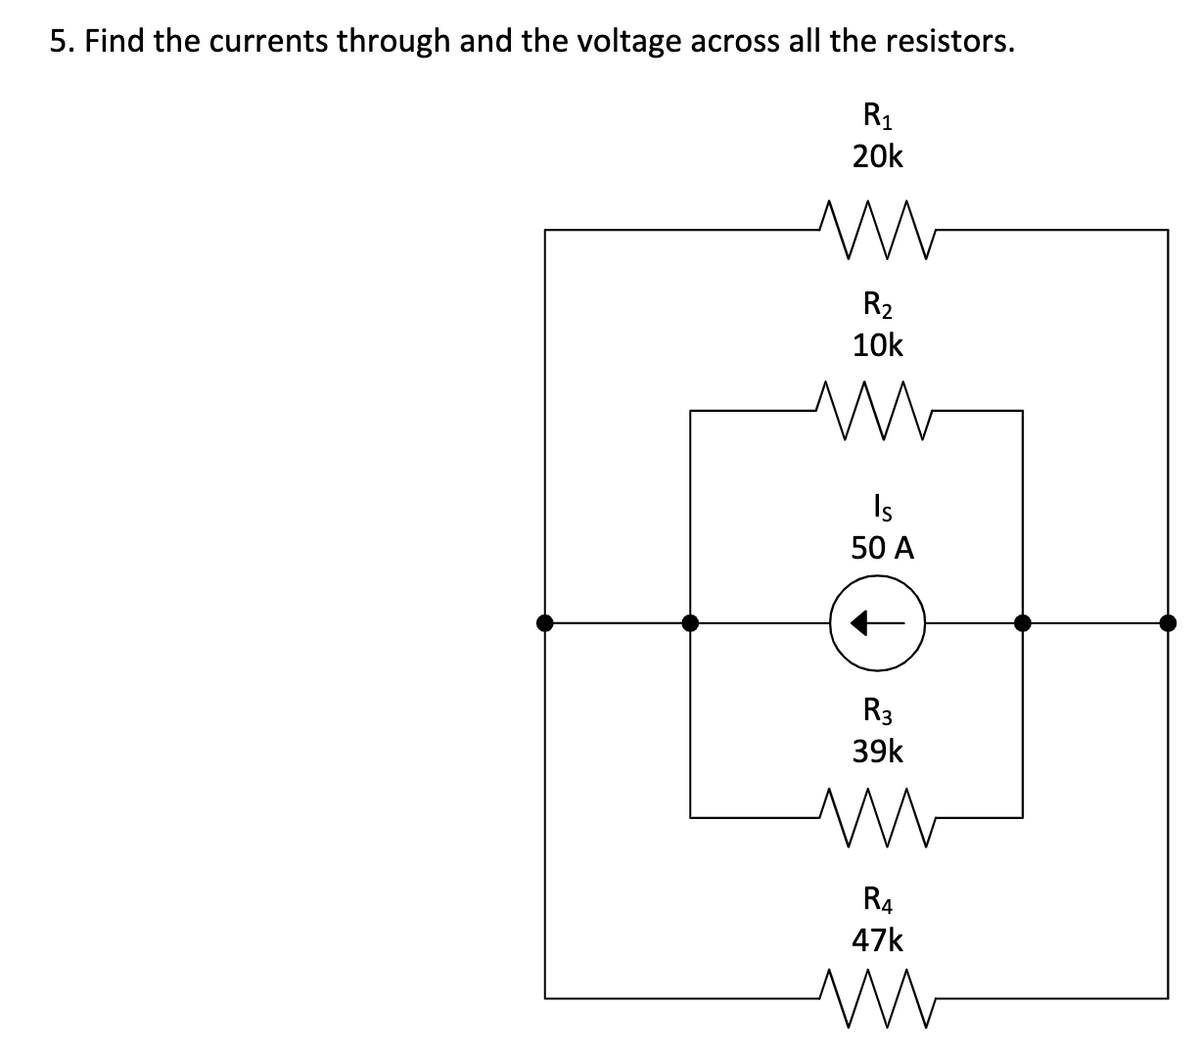 5. Find the currents through and the voltage across all the resistors.
R1
20k
R2
10k
Is
50 A
R3
39k
R4
47k
